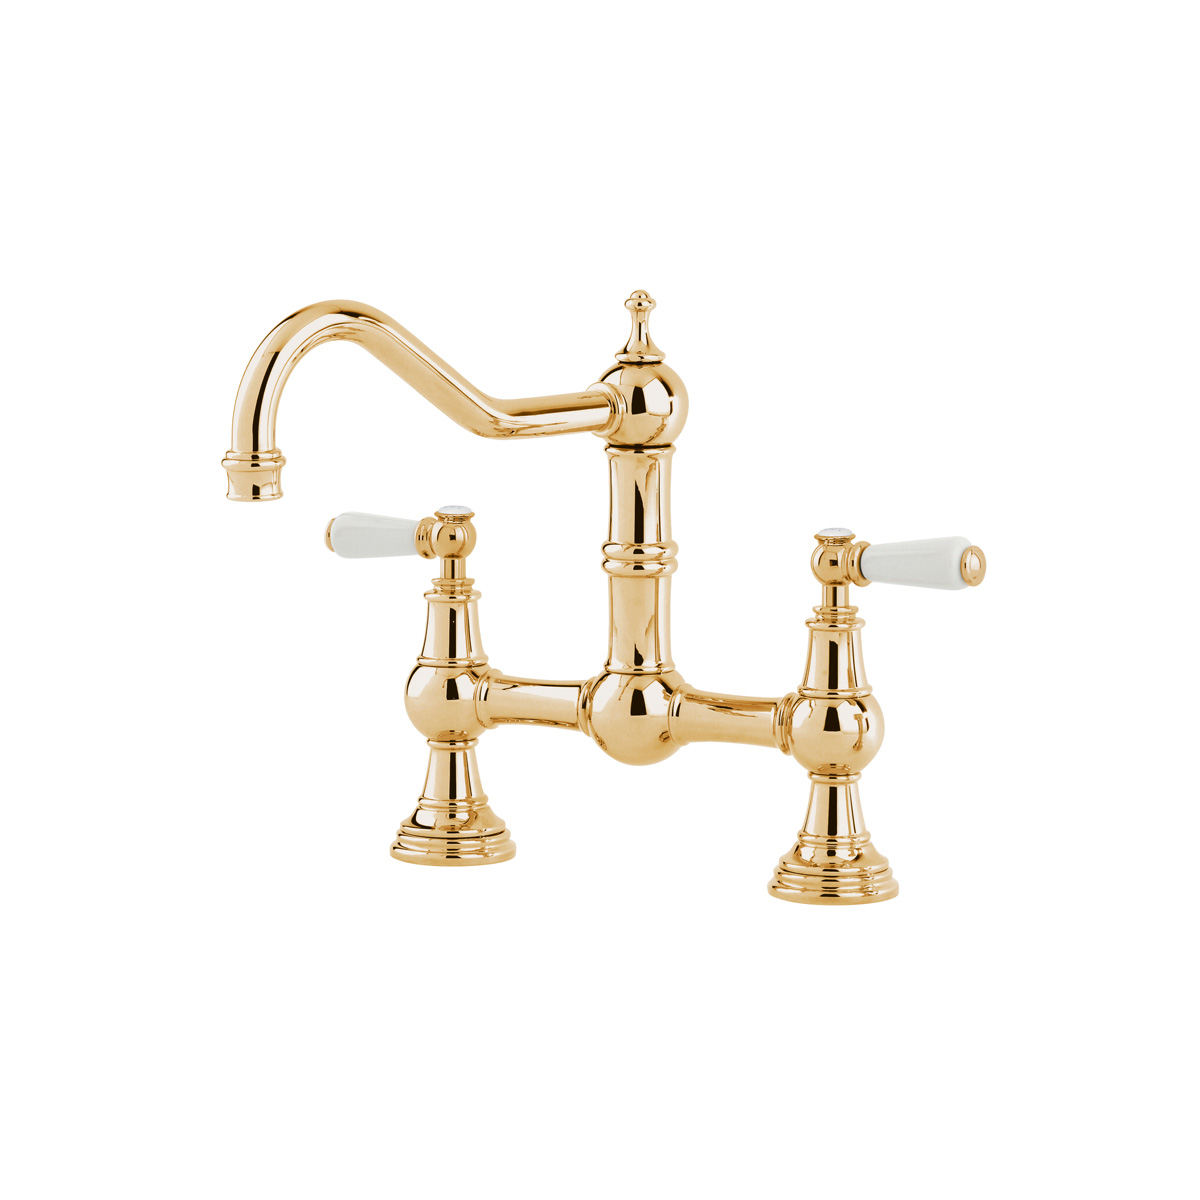 Shaws by Perrin & Rowe Hambleton French bridge mixer in Polished Brass. Provence style kitchen tap AUSH.4751. Distributed in Australia by Luxe by Design, Brisbane.